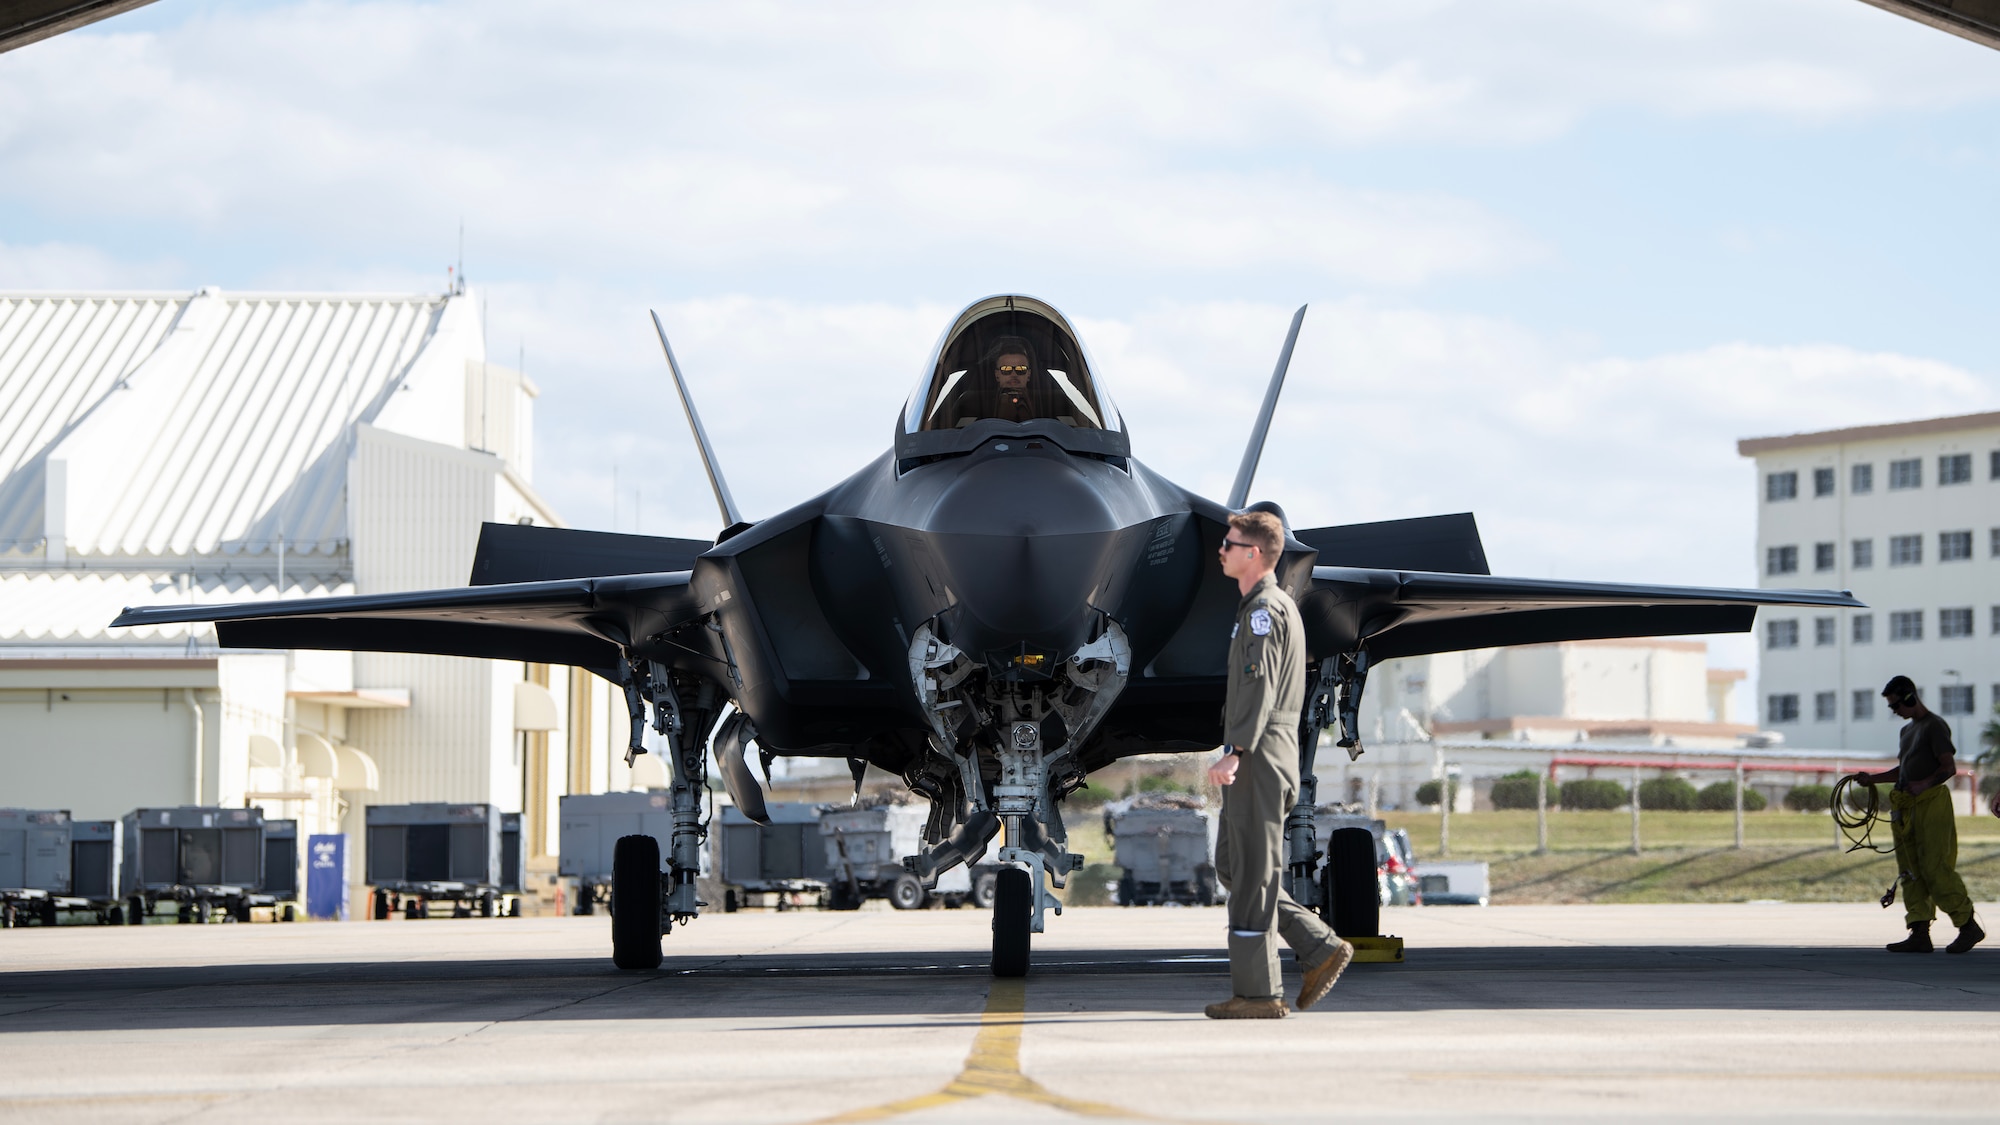 An F-35A Lightning II assigned to the 4th Fighter Squadron, Hill Air Force Base, Utah, parks on the flightline at Kadena Air Base, Japan, Nov. 20, 2023. The 4th FS will be joining the 356th Fighter Squadron from Eielson AFB, Alaska, in providing forward-deployed, fifth-generation fighter capabilities to assure allies and deter threats in the Indo-Pacific region. (U.S. Air Force photo by Staff Sgt. Jessi Roth)